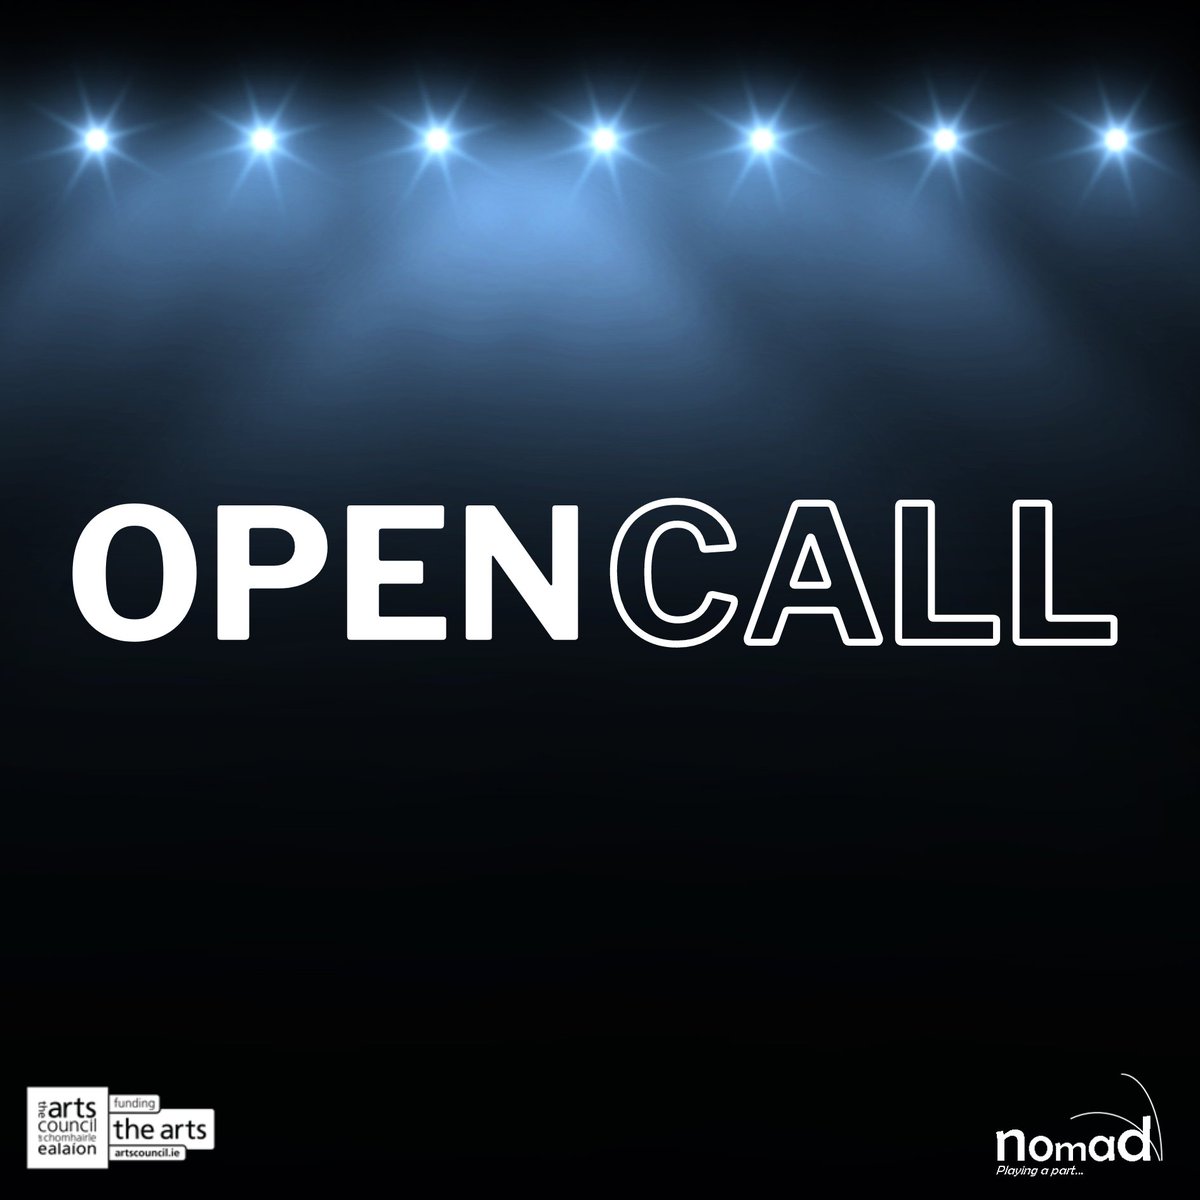 📣EXCITING NEWS⚡️ NOMAD invites proposals from theatre/dance artists and companies for: A new theatre/dance work OR A re-imagined play/production for a future tour supported by Nomad 📍Deadline 5pm 31st May. Full details on 👉 nomadtheatrenetwork.ie/open-call/